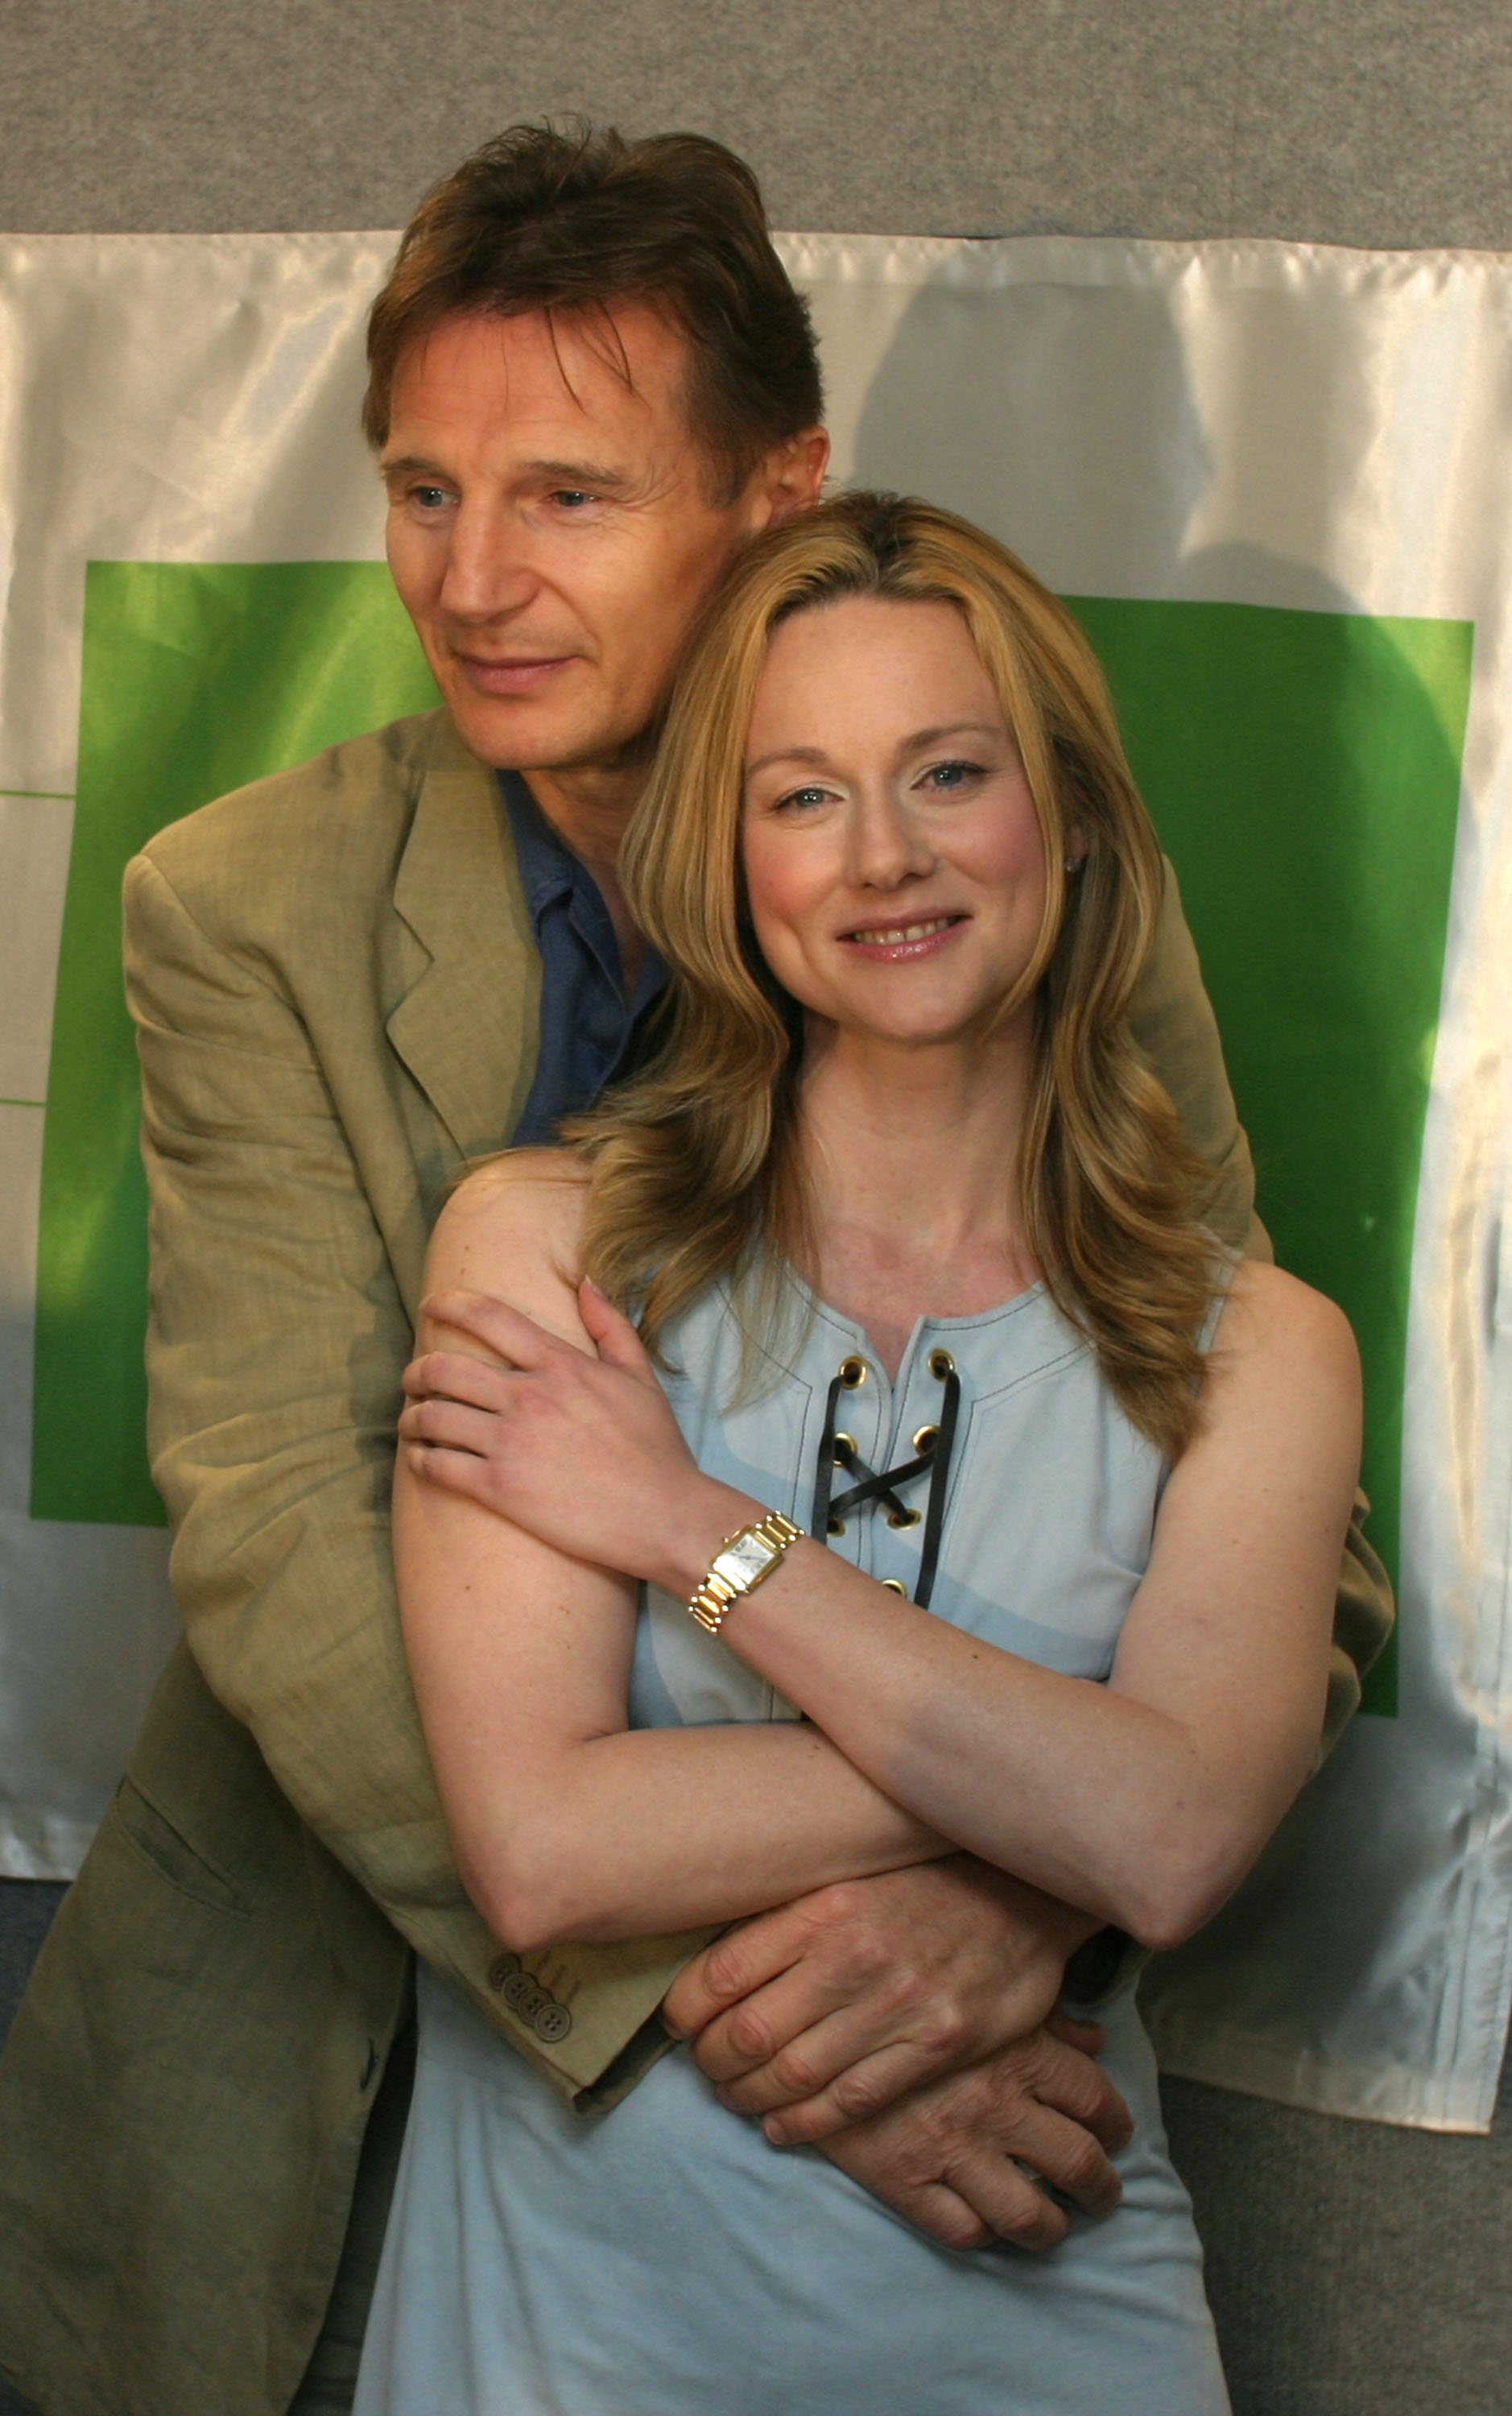 Actors Liam Neeson and Laura Linney of the cast of "Kinsley" pose for a picture during the 29th annual Toronto International Film Festival September 13, 2004 in Toronto, Ontario, Canada | Source: Getty Images